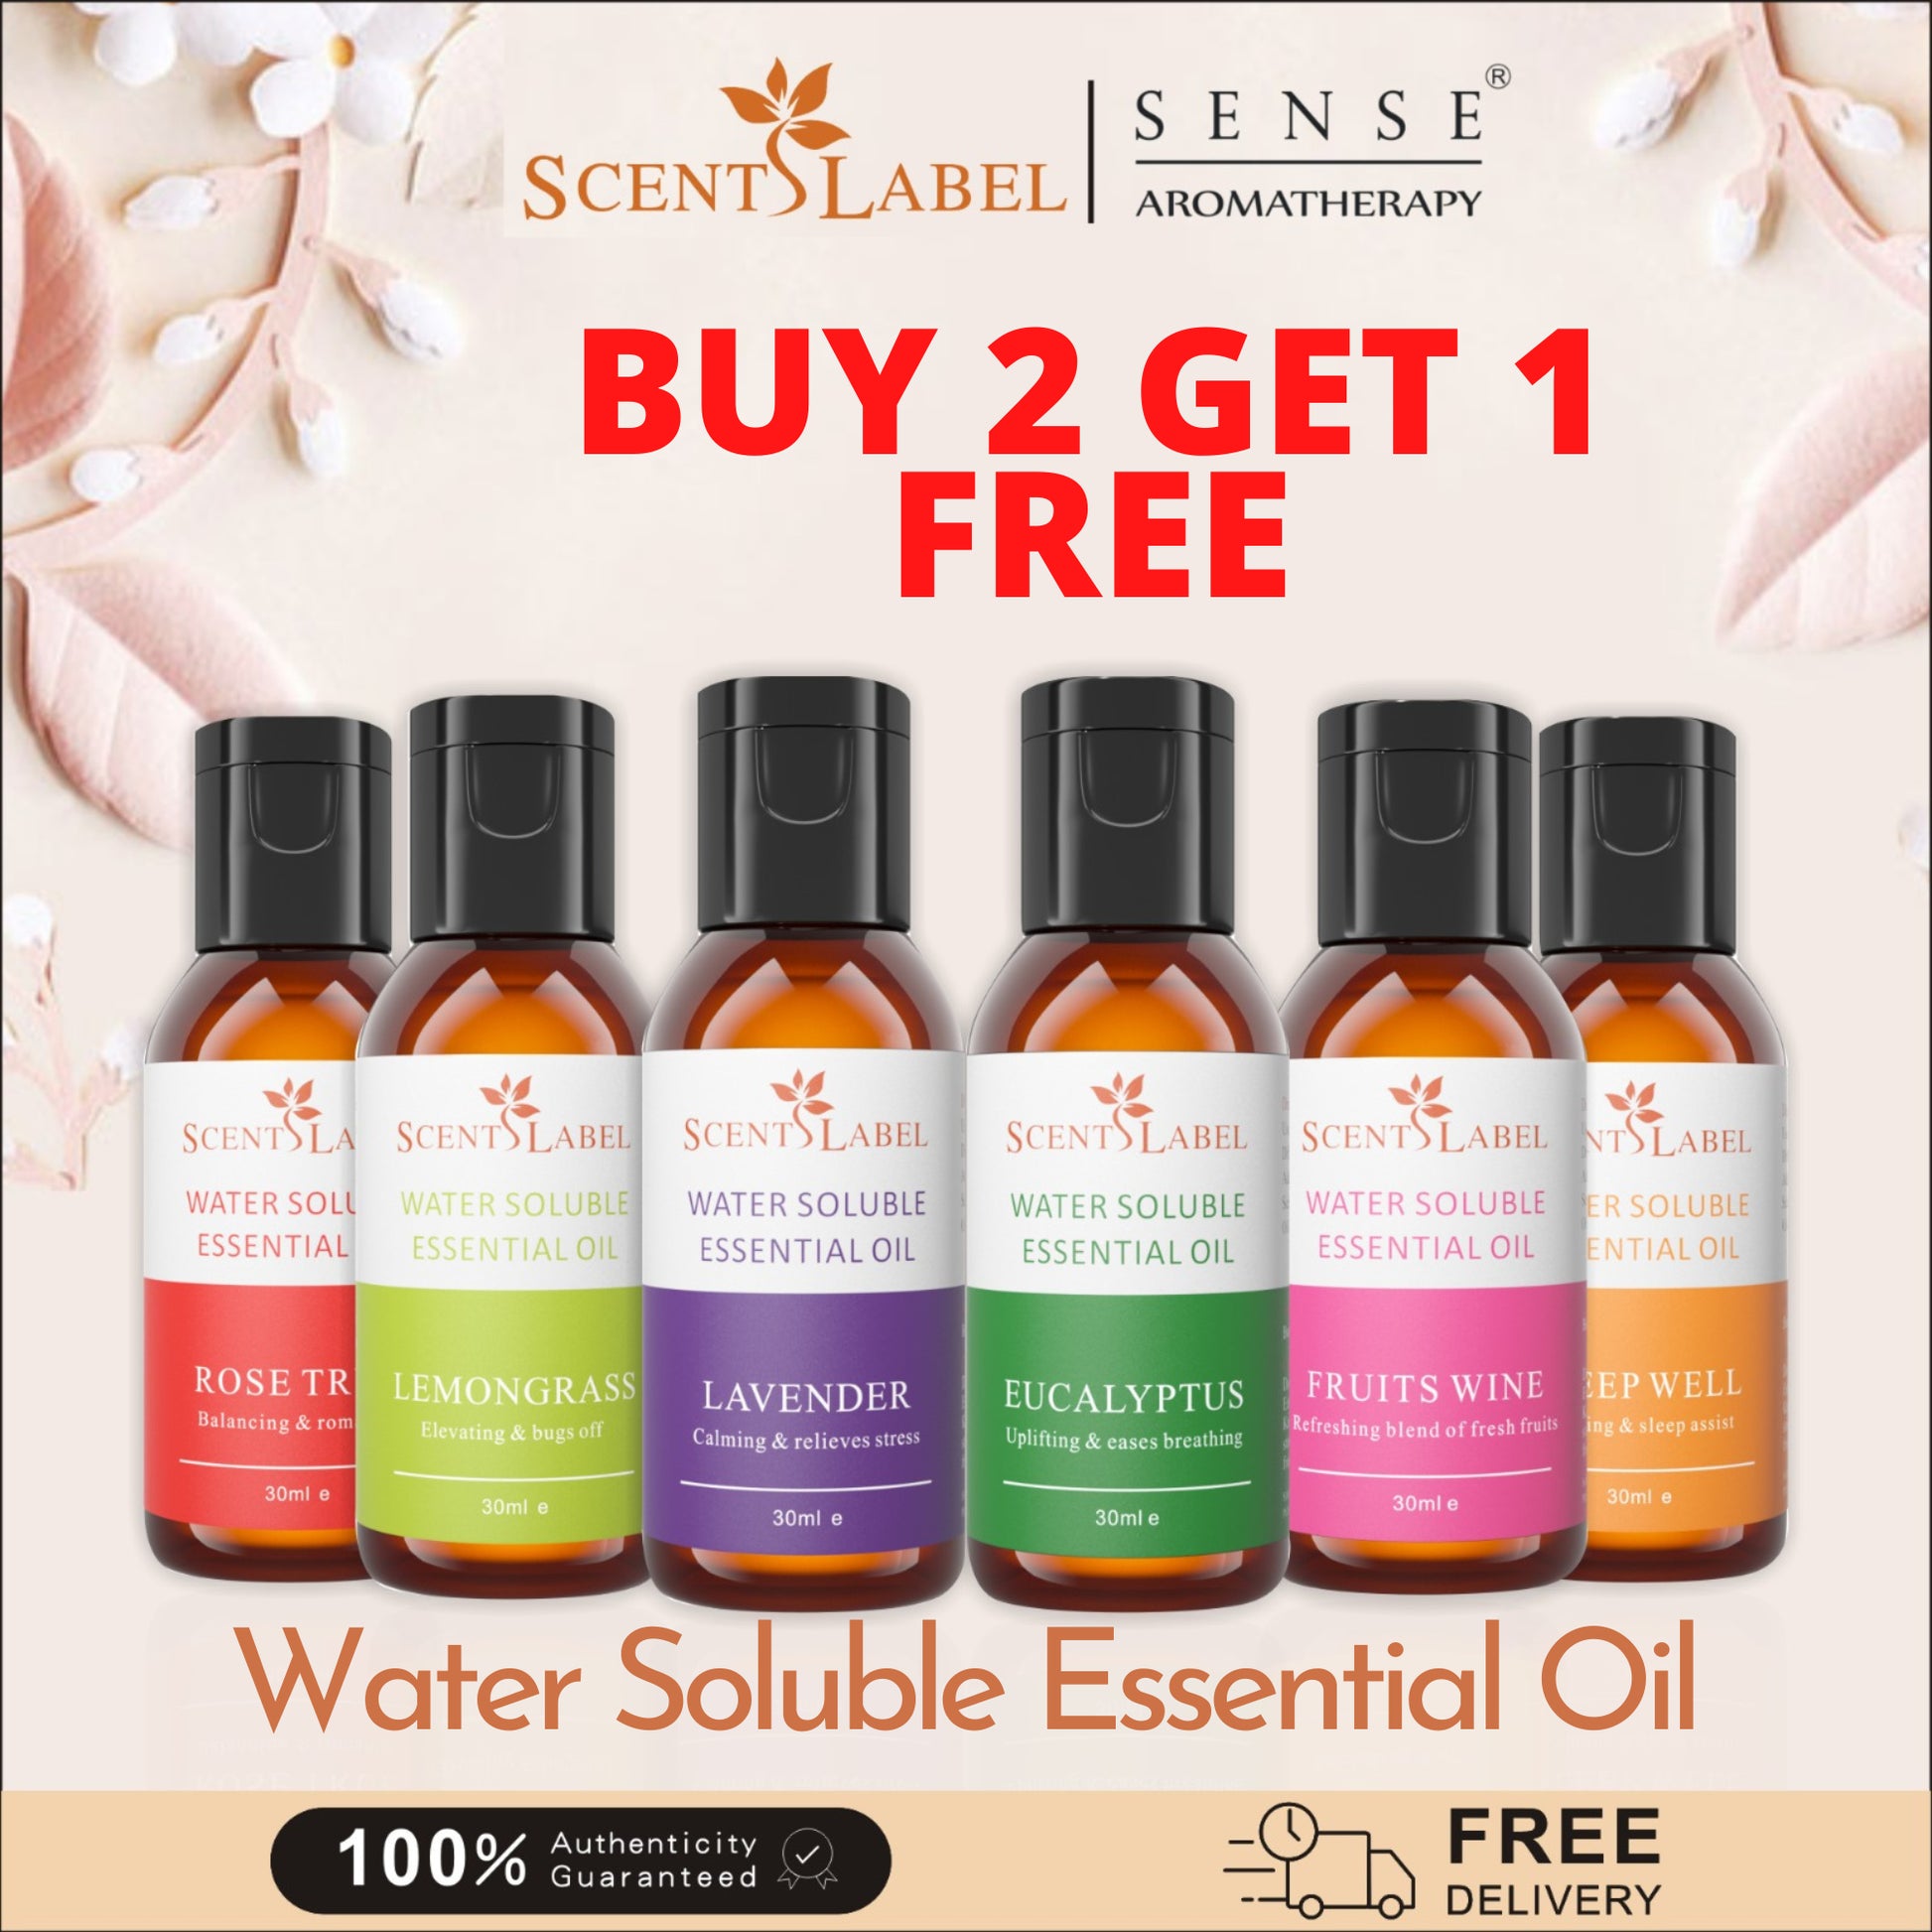 [NEW SCENTS] BUNDLE OF 3 X WATER SOLUBLE ESSENTIAL OILS 30ML - The Sense House 